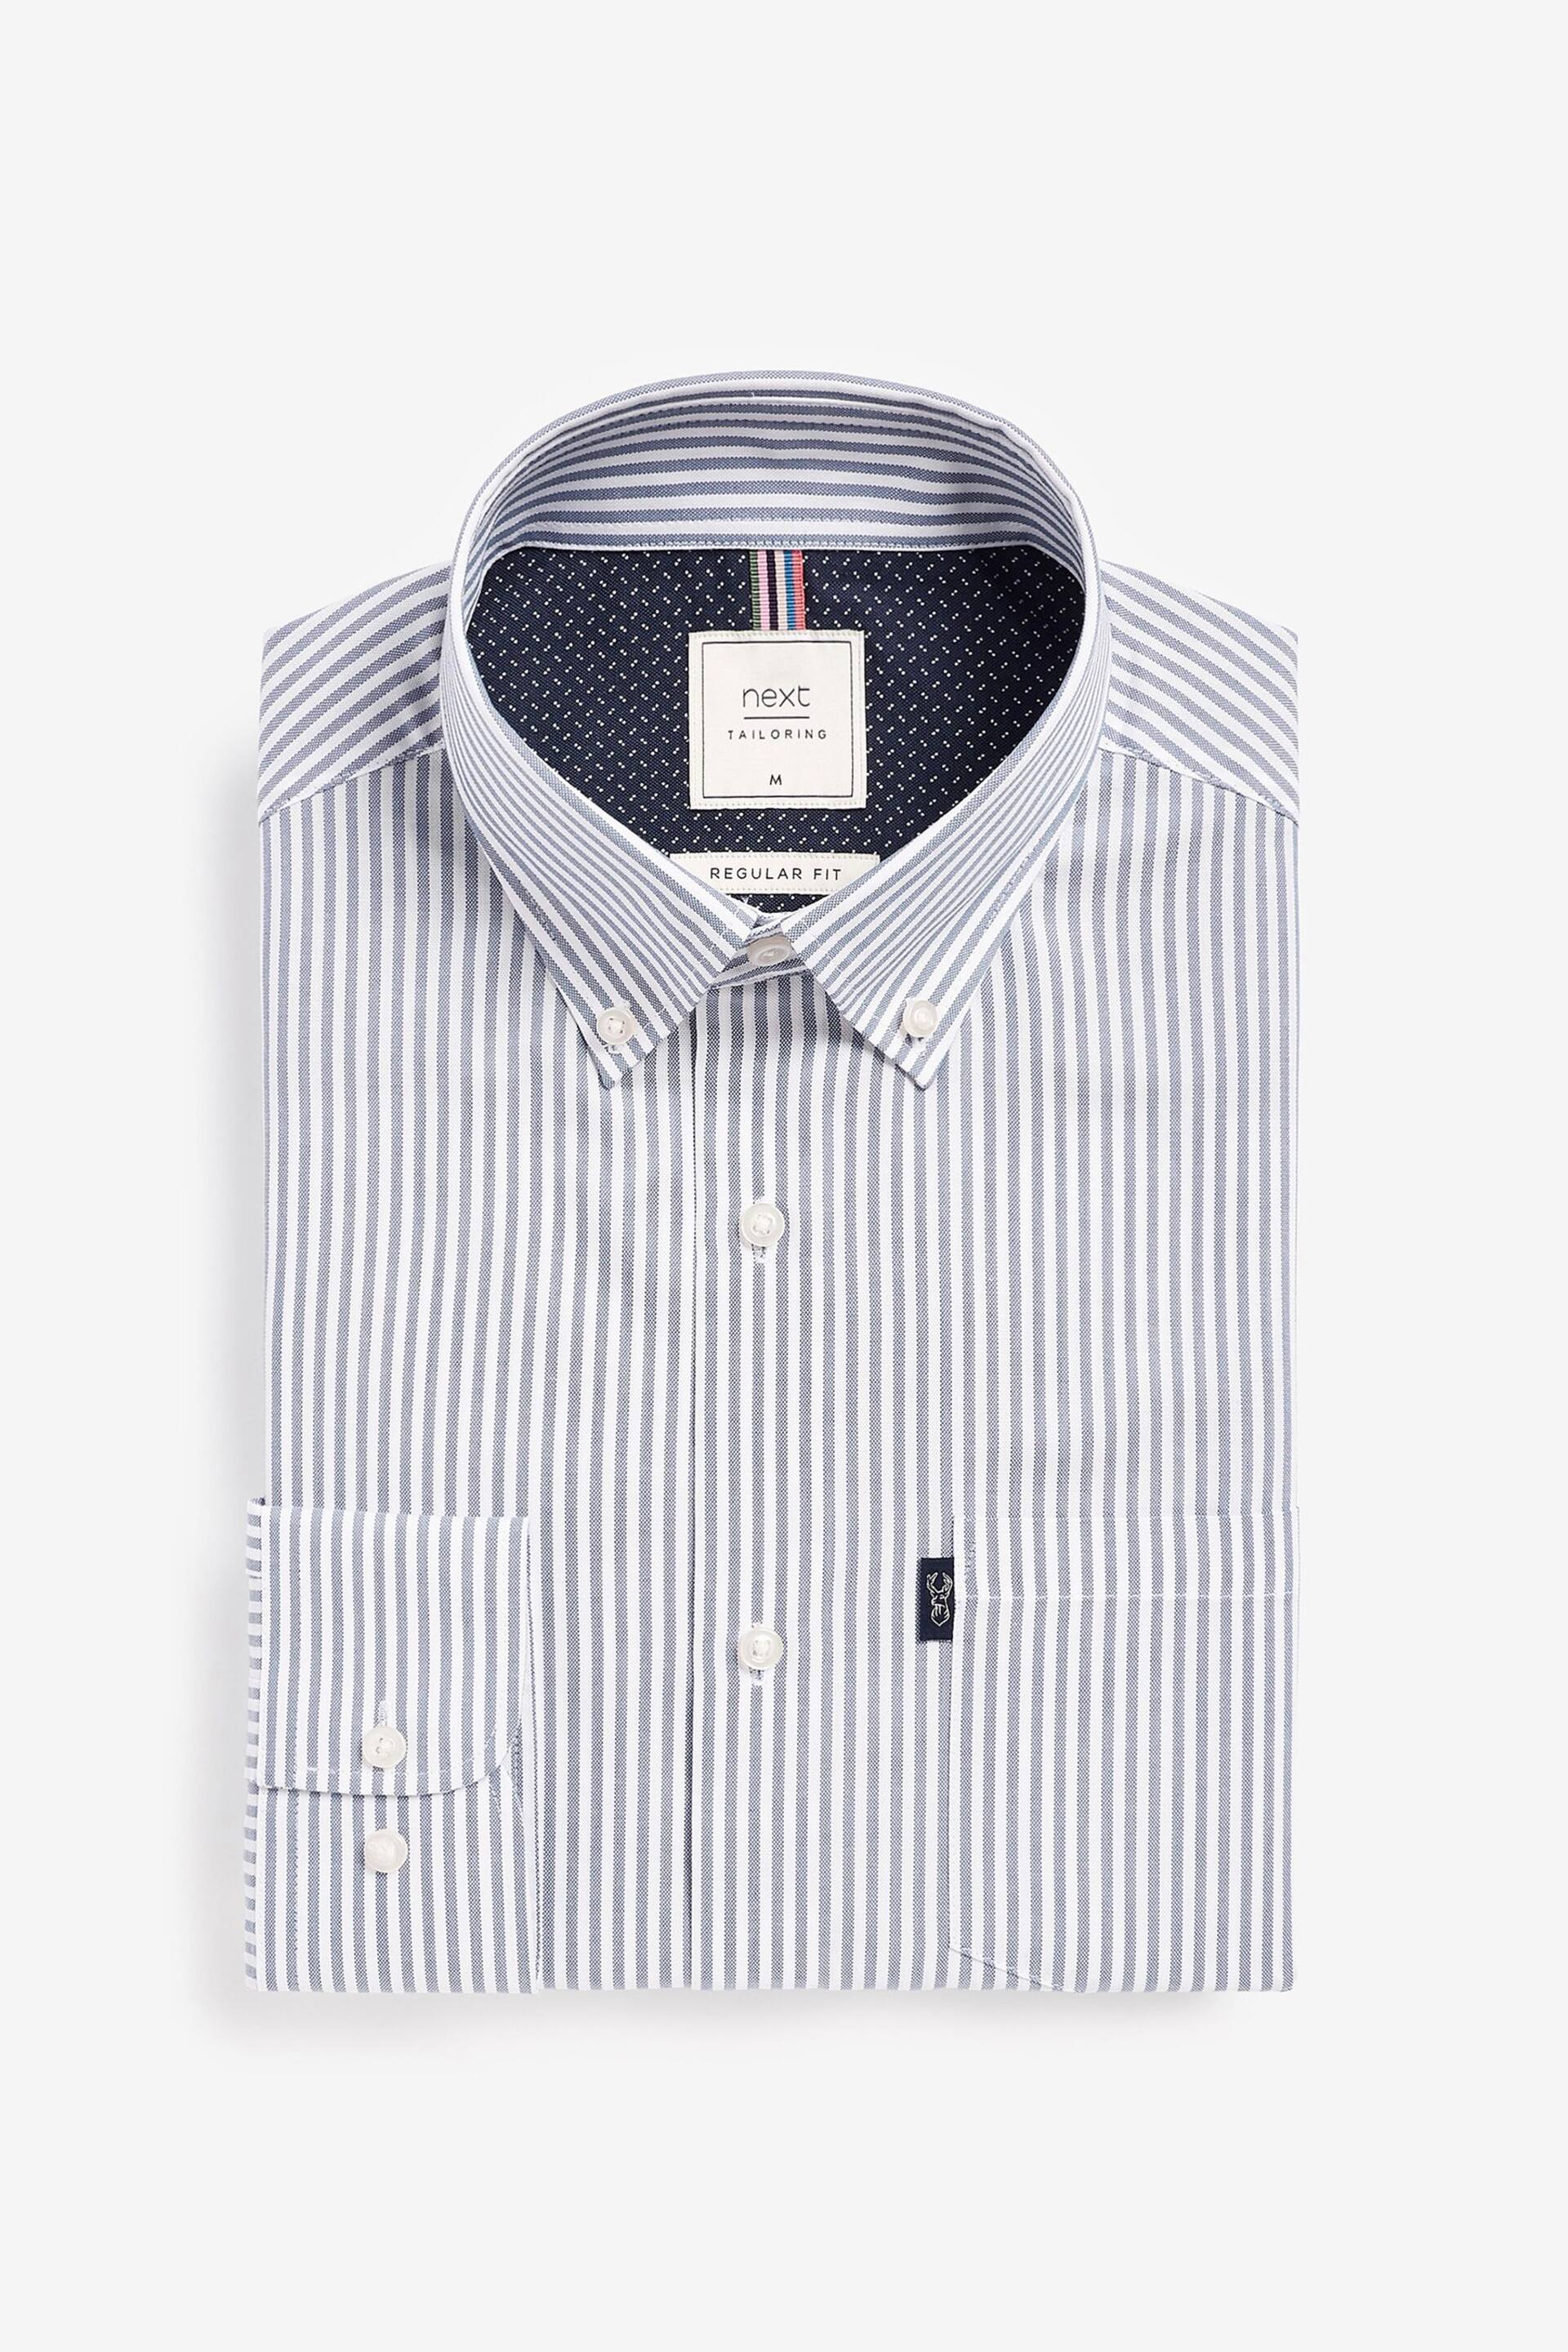 White/Blue Stripe Regular Fit Easy Iron Button Down Oxford Shirt - Image 6 of 9